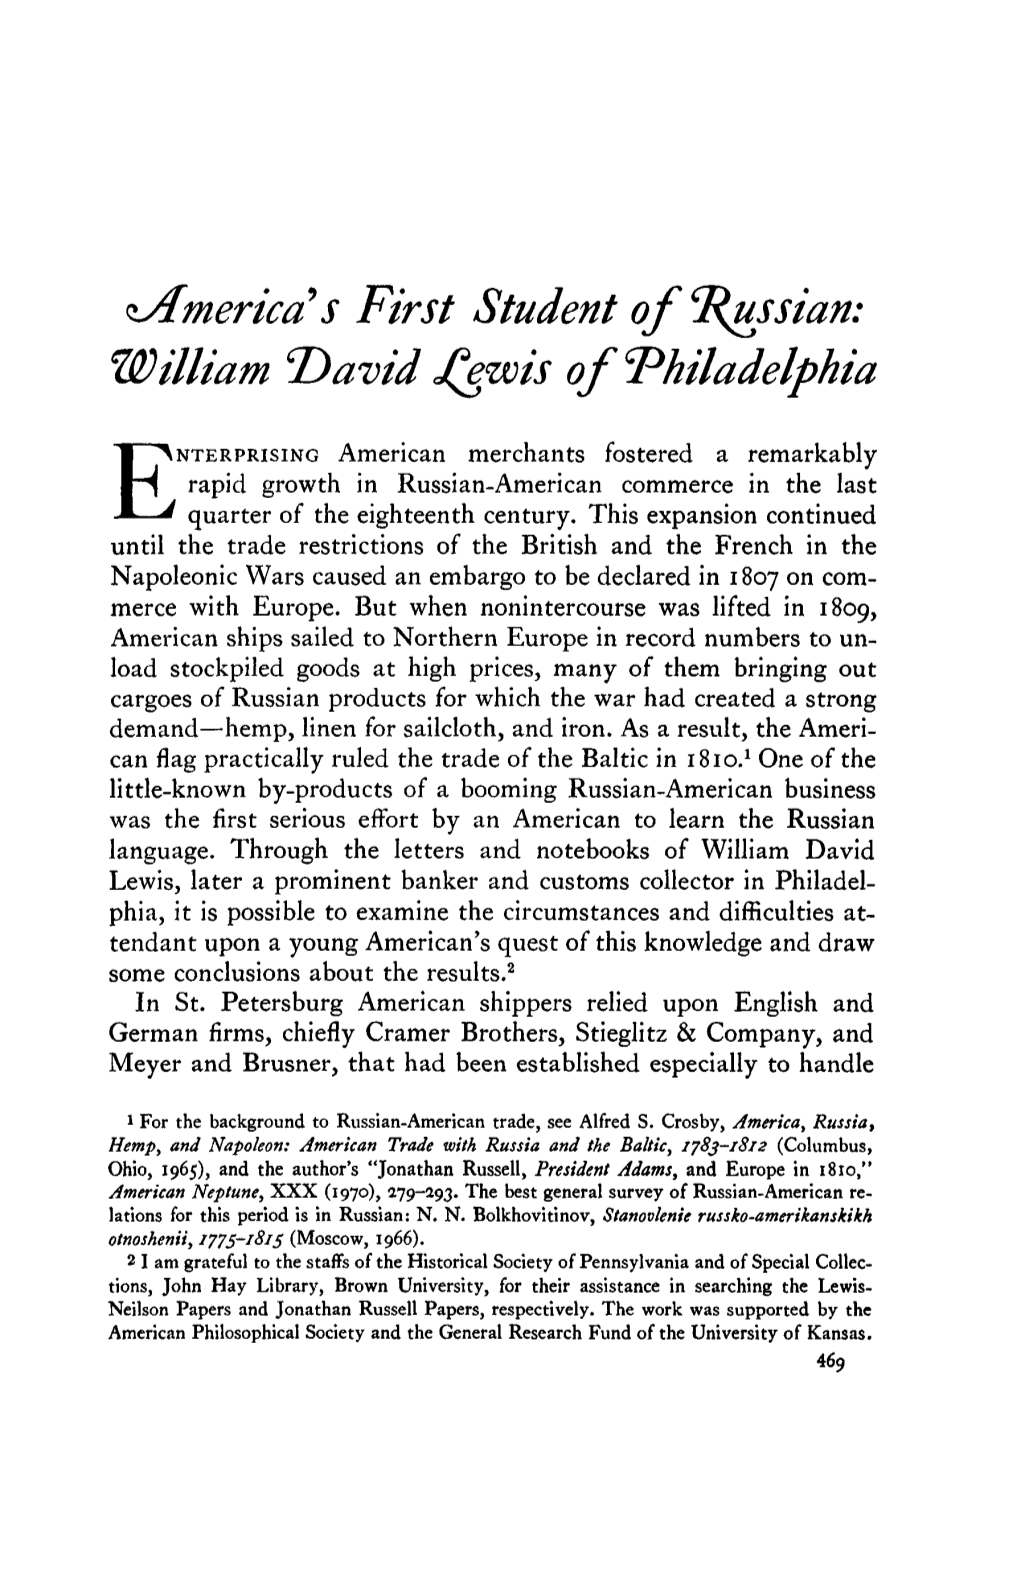 ^America S First Student of T(Ussian: William T&gt;Avid Jfywis Of'philadelphia